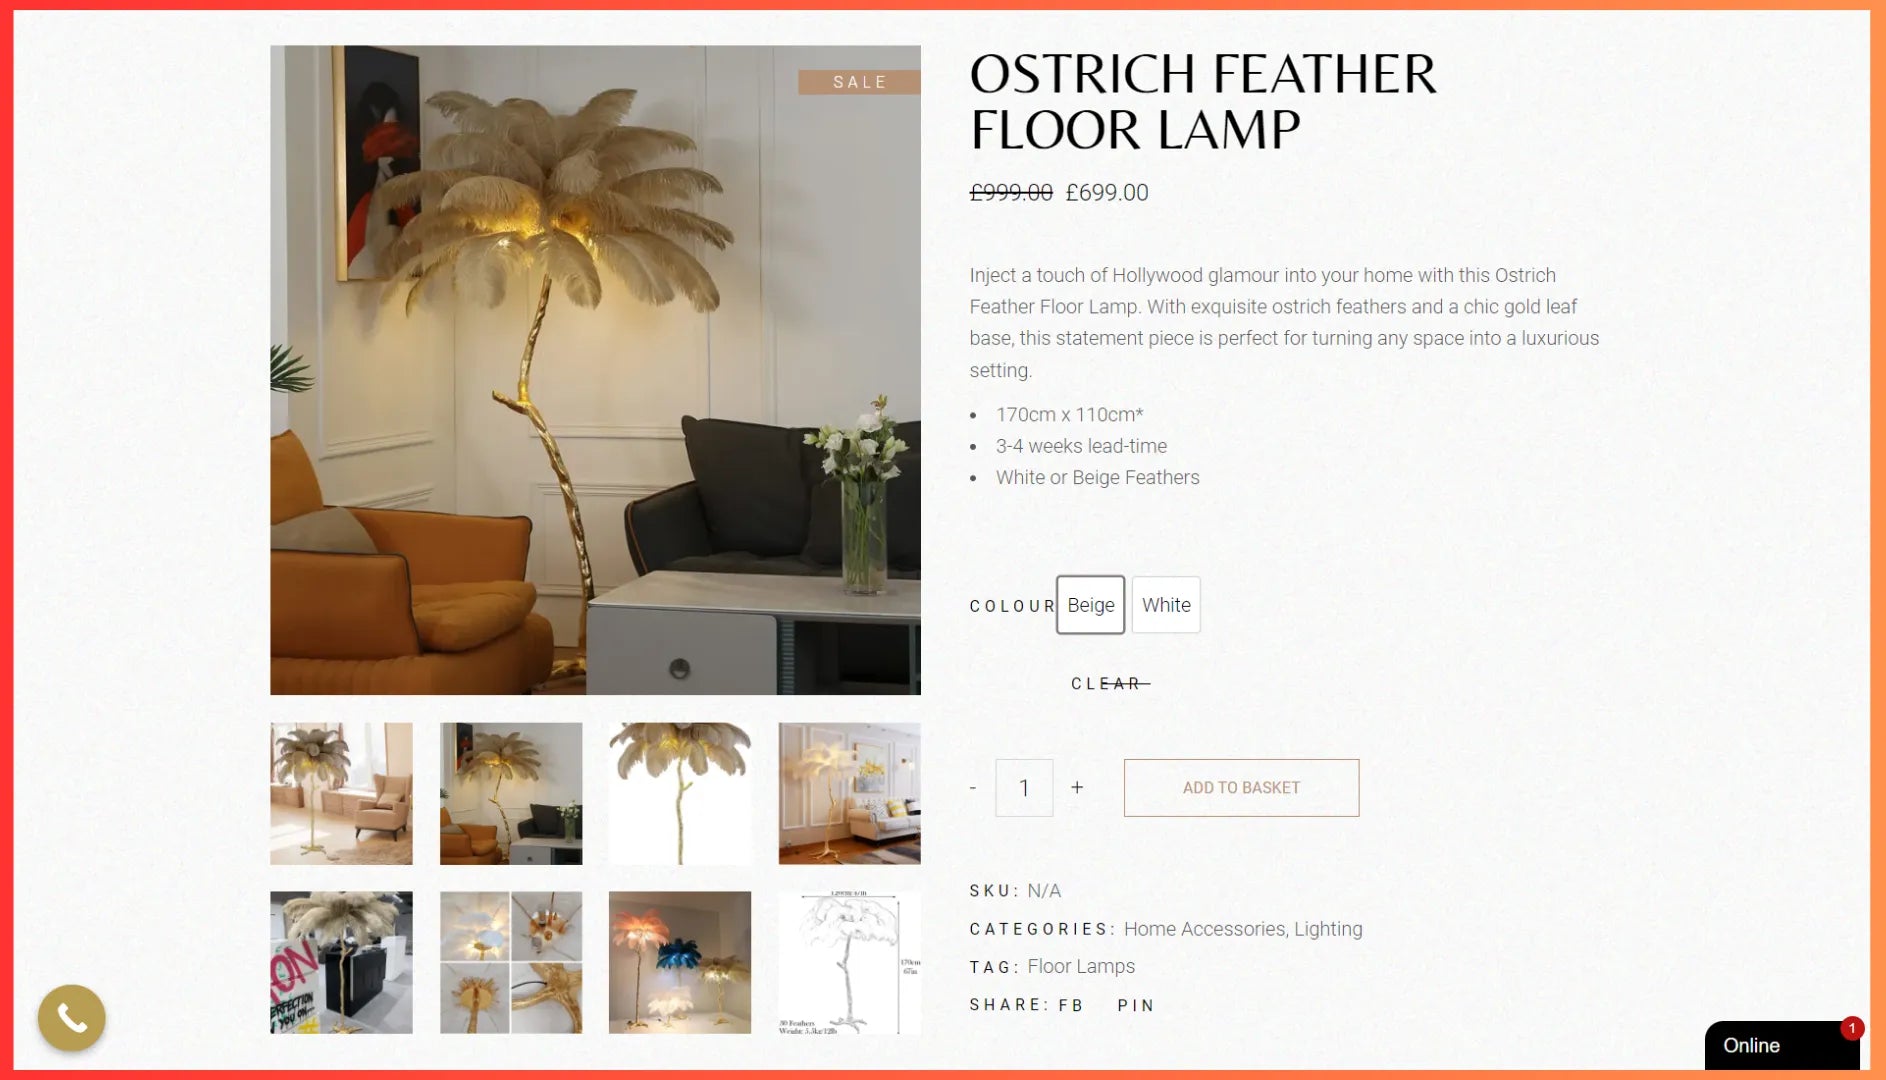 High-ticket product example - Ostrich feather floor lamp